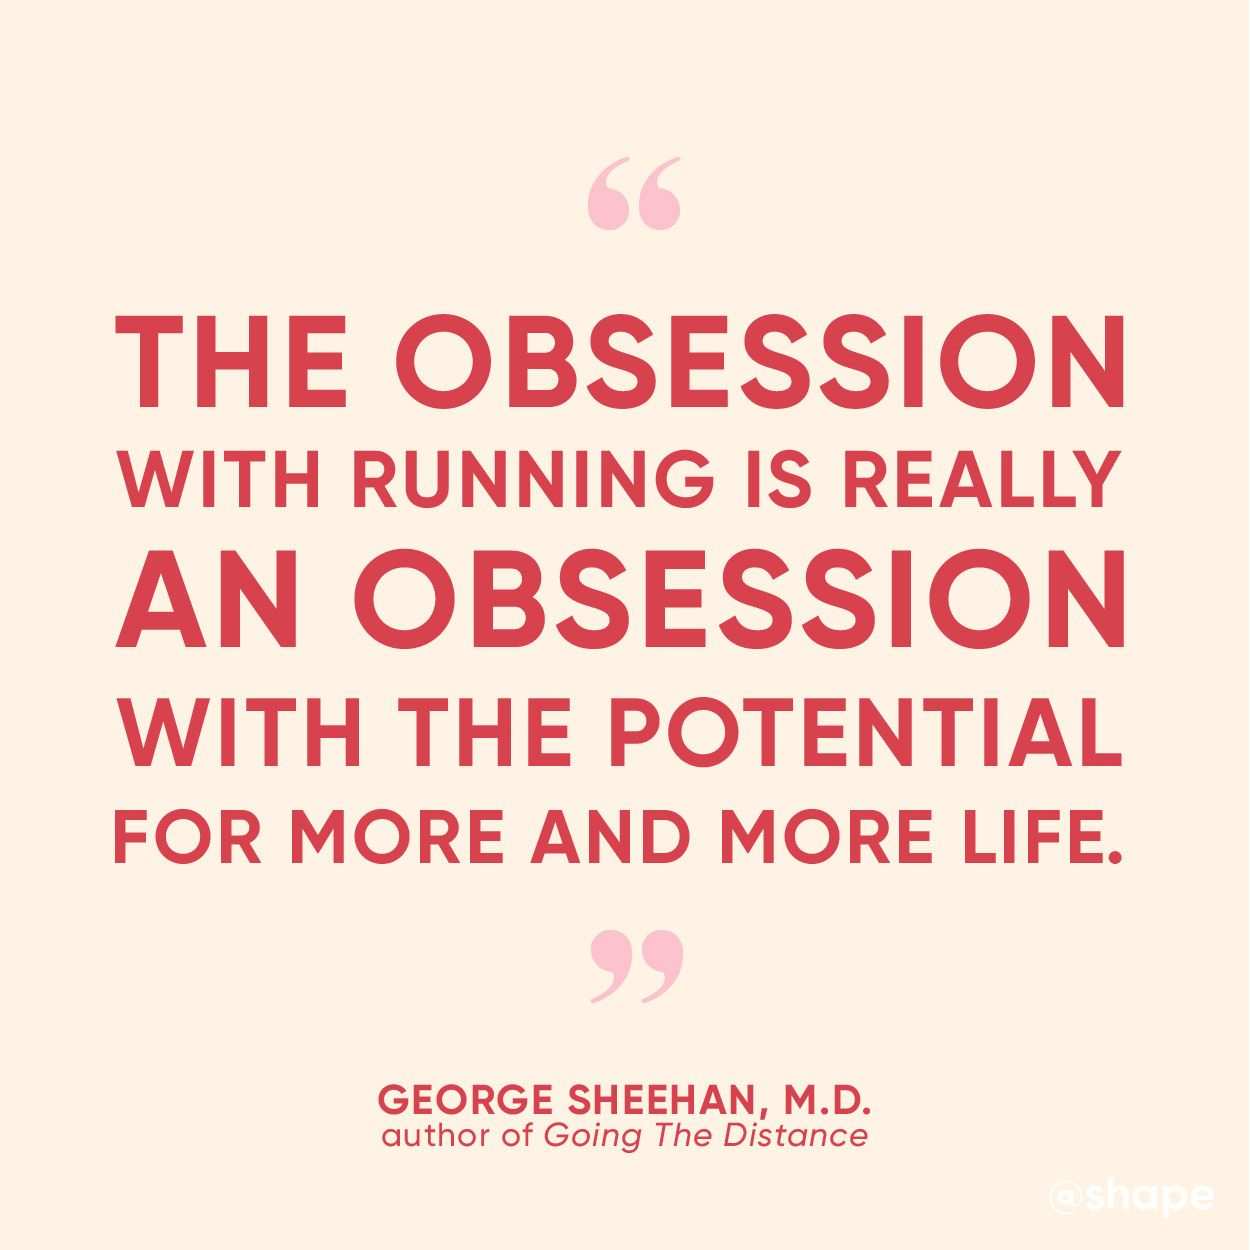 24 Running Quotes That Ll Keep You Going During Lung Runs Running Motivation Quotes Motivational Quotes Inspirational Running Quotes